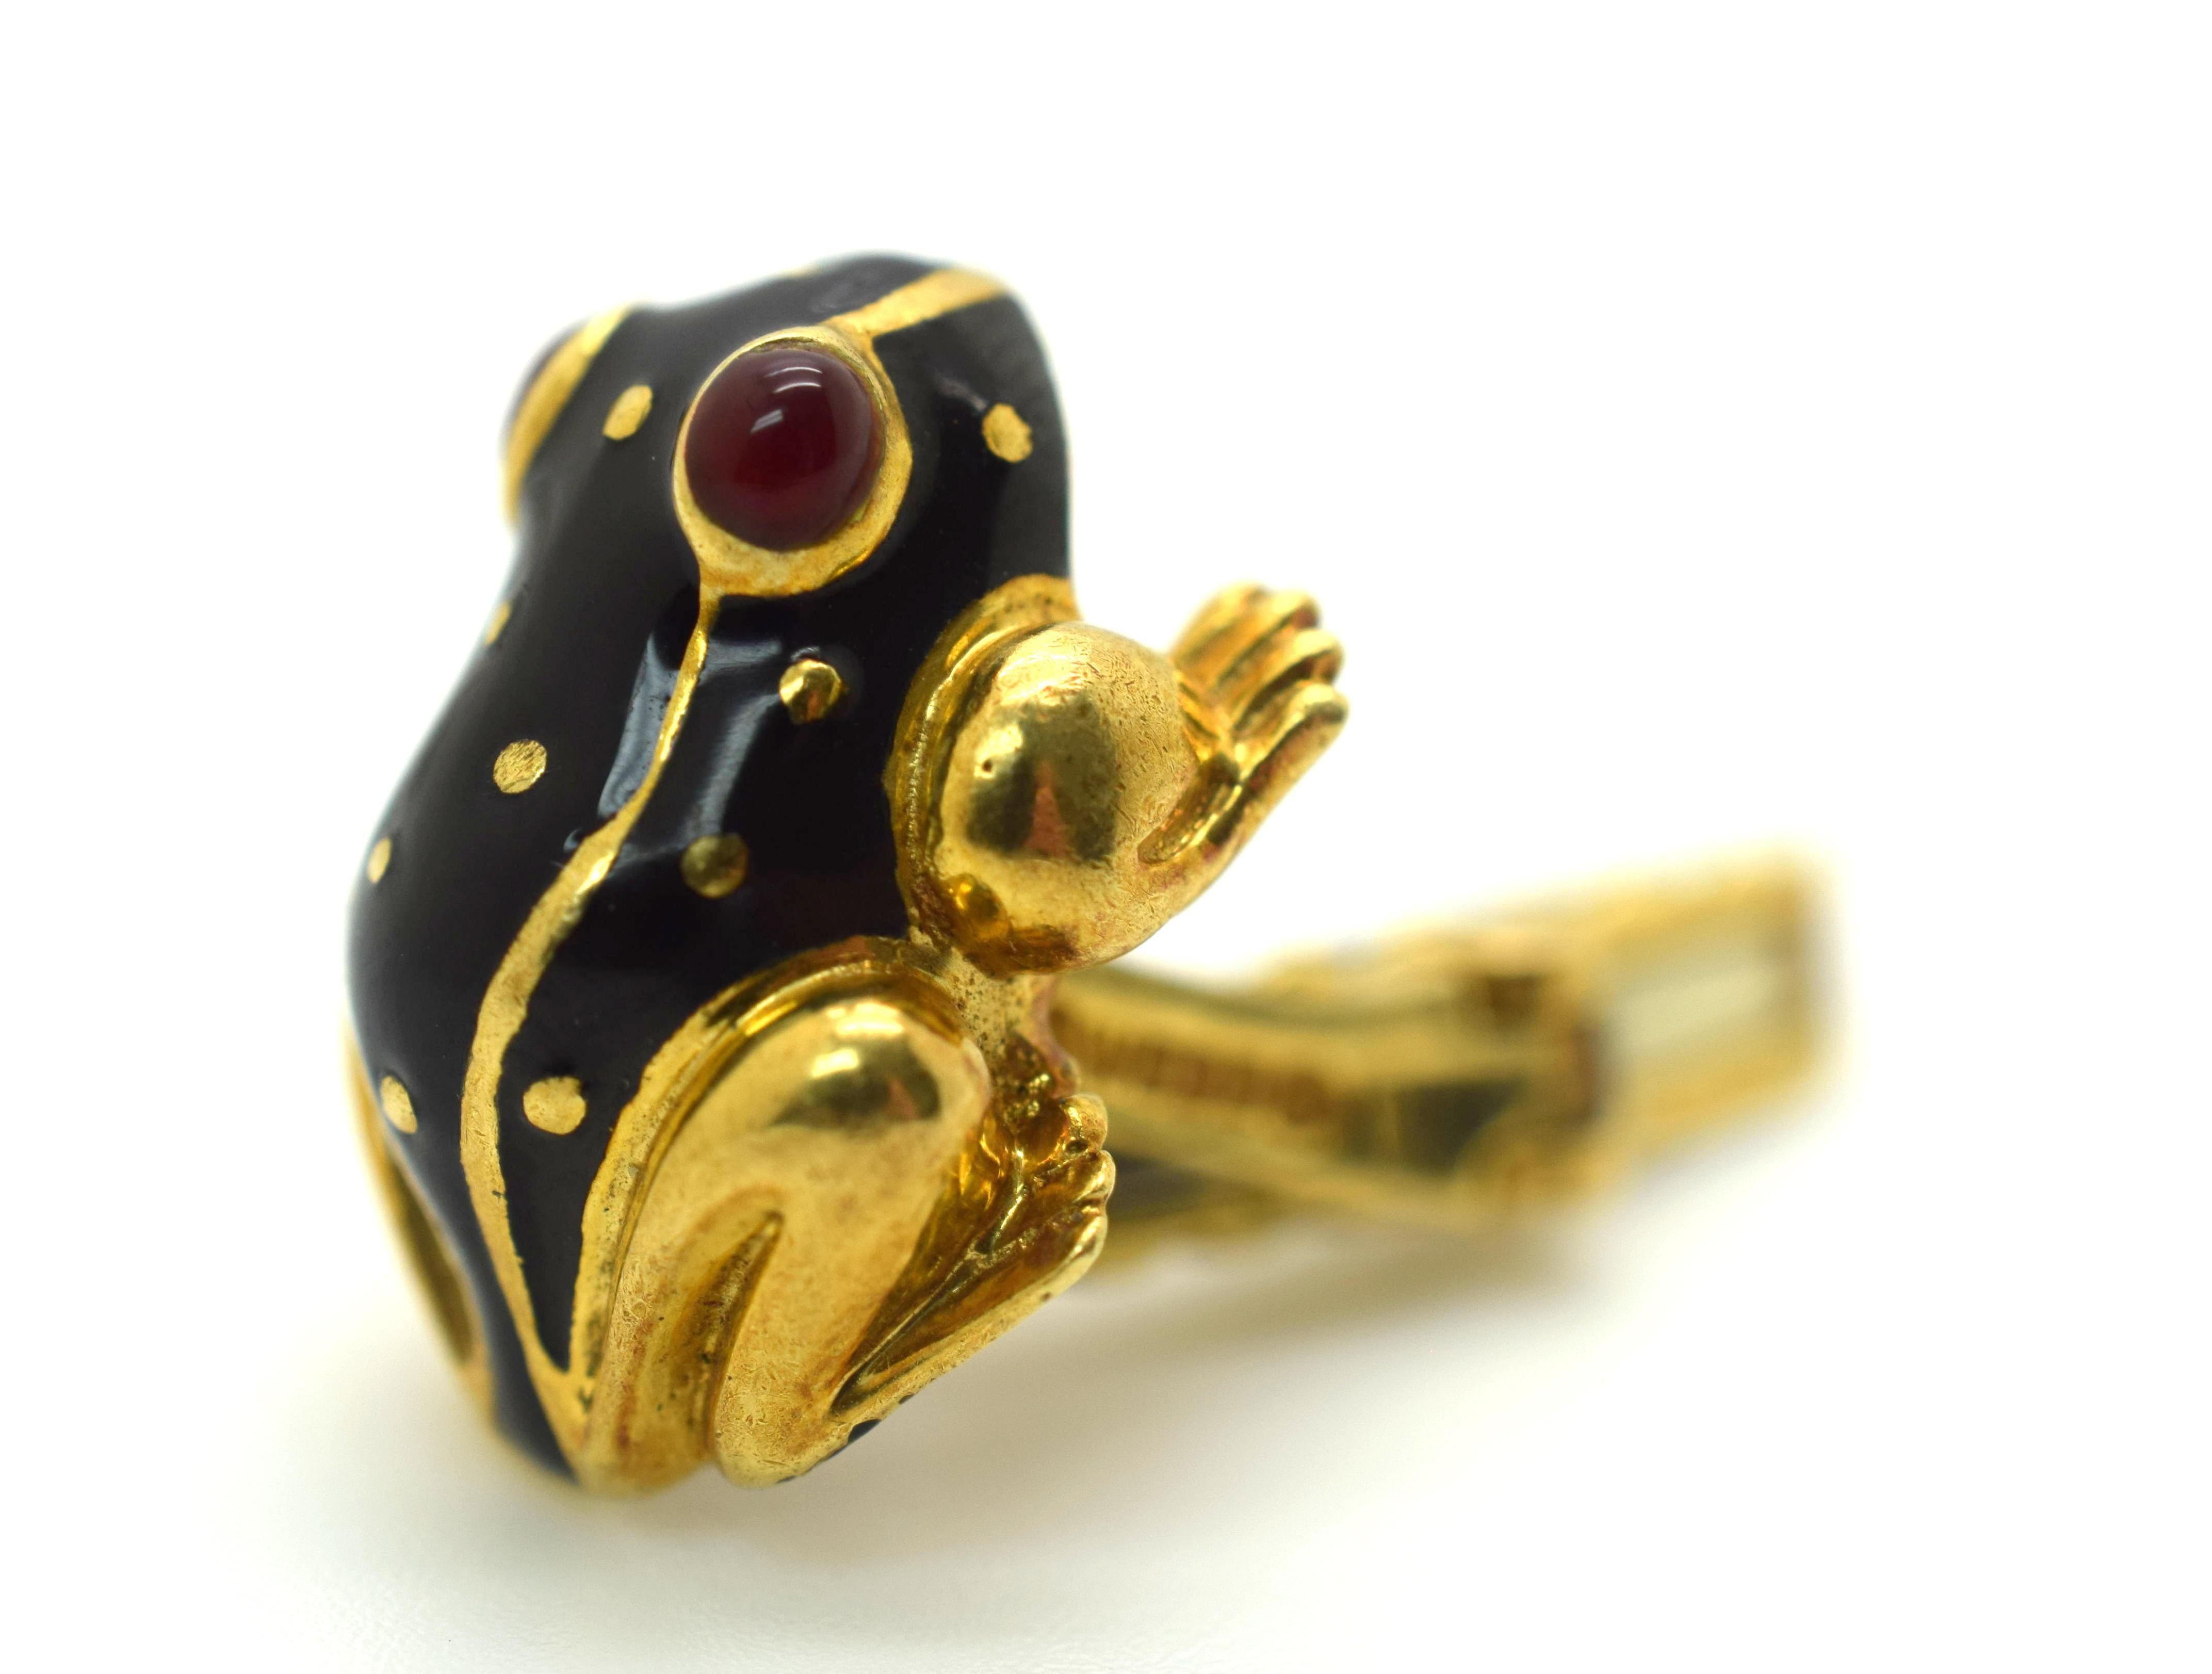 Fantastic design by famed designer David Webb. These cuff links are in amazing vintage condition. Crisp black enamel is showcased on the frogs backside with golden dots throughout. Eyes are red enamel with a decorative black enamel design of the